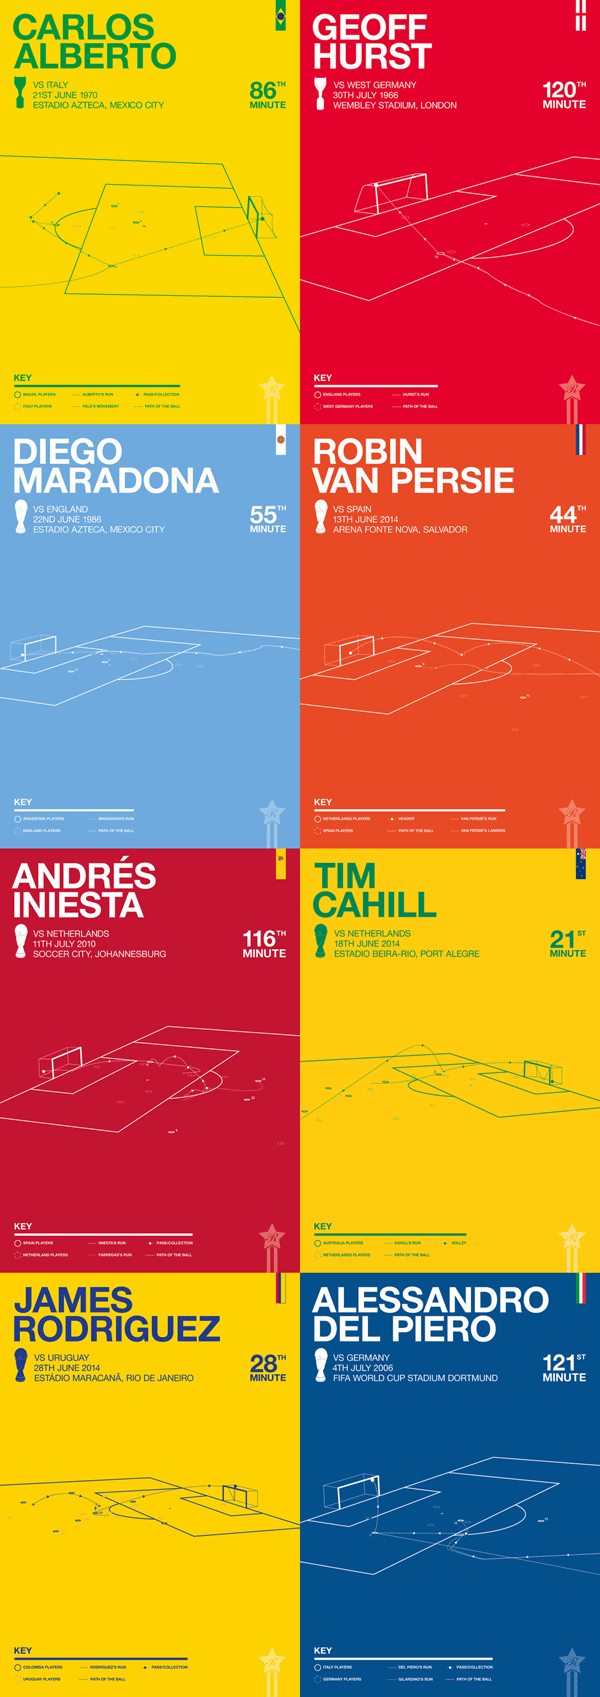 Illustrated prints of historical moments from different football world cups. All print were created by Rick Hincks.